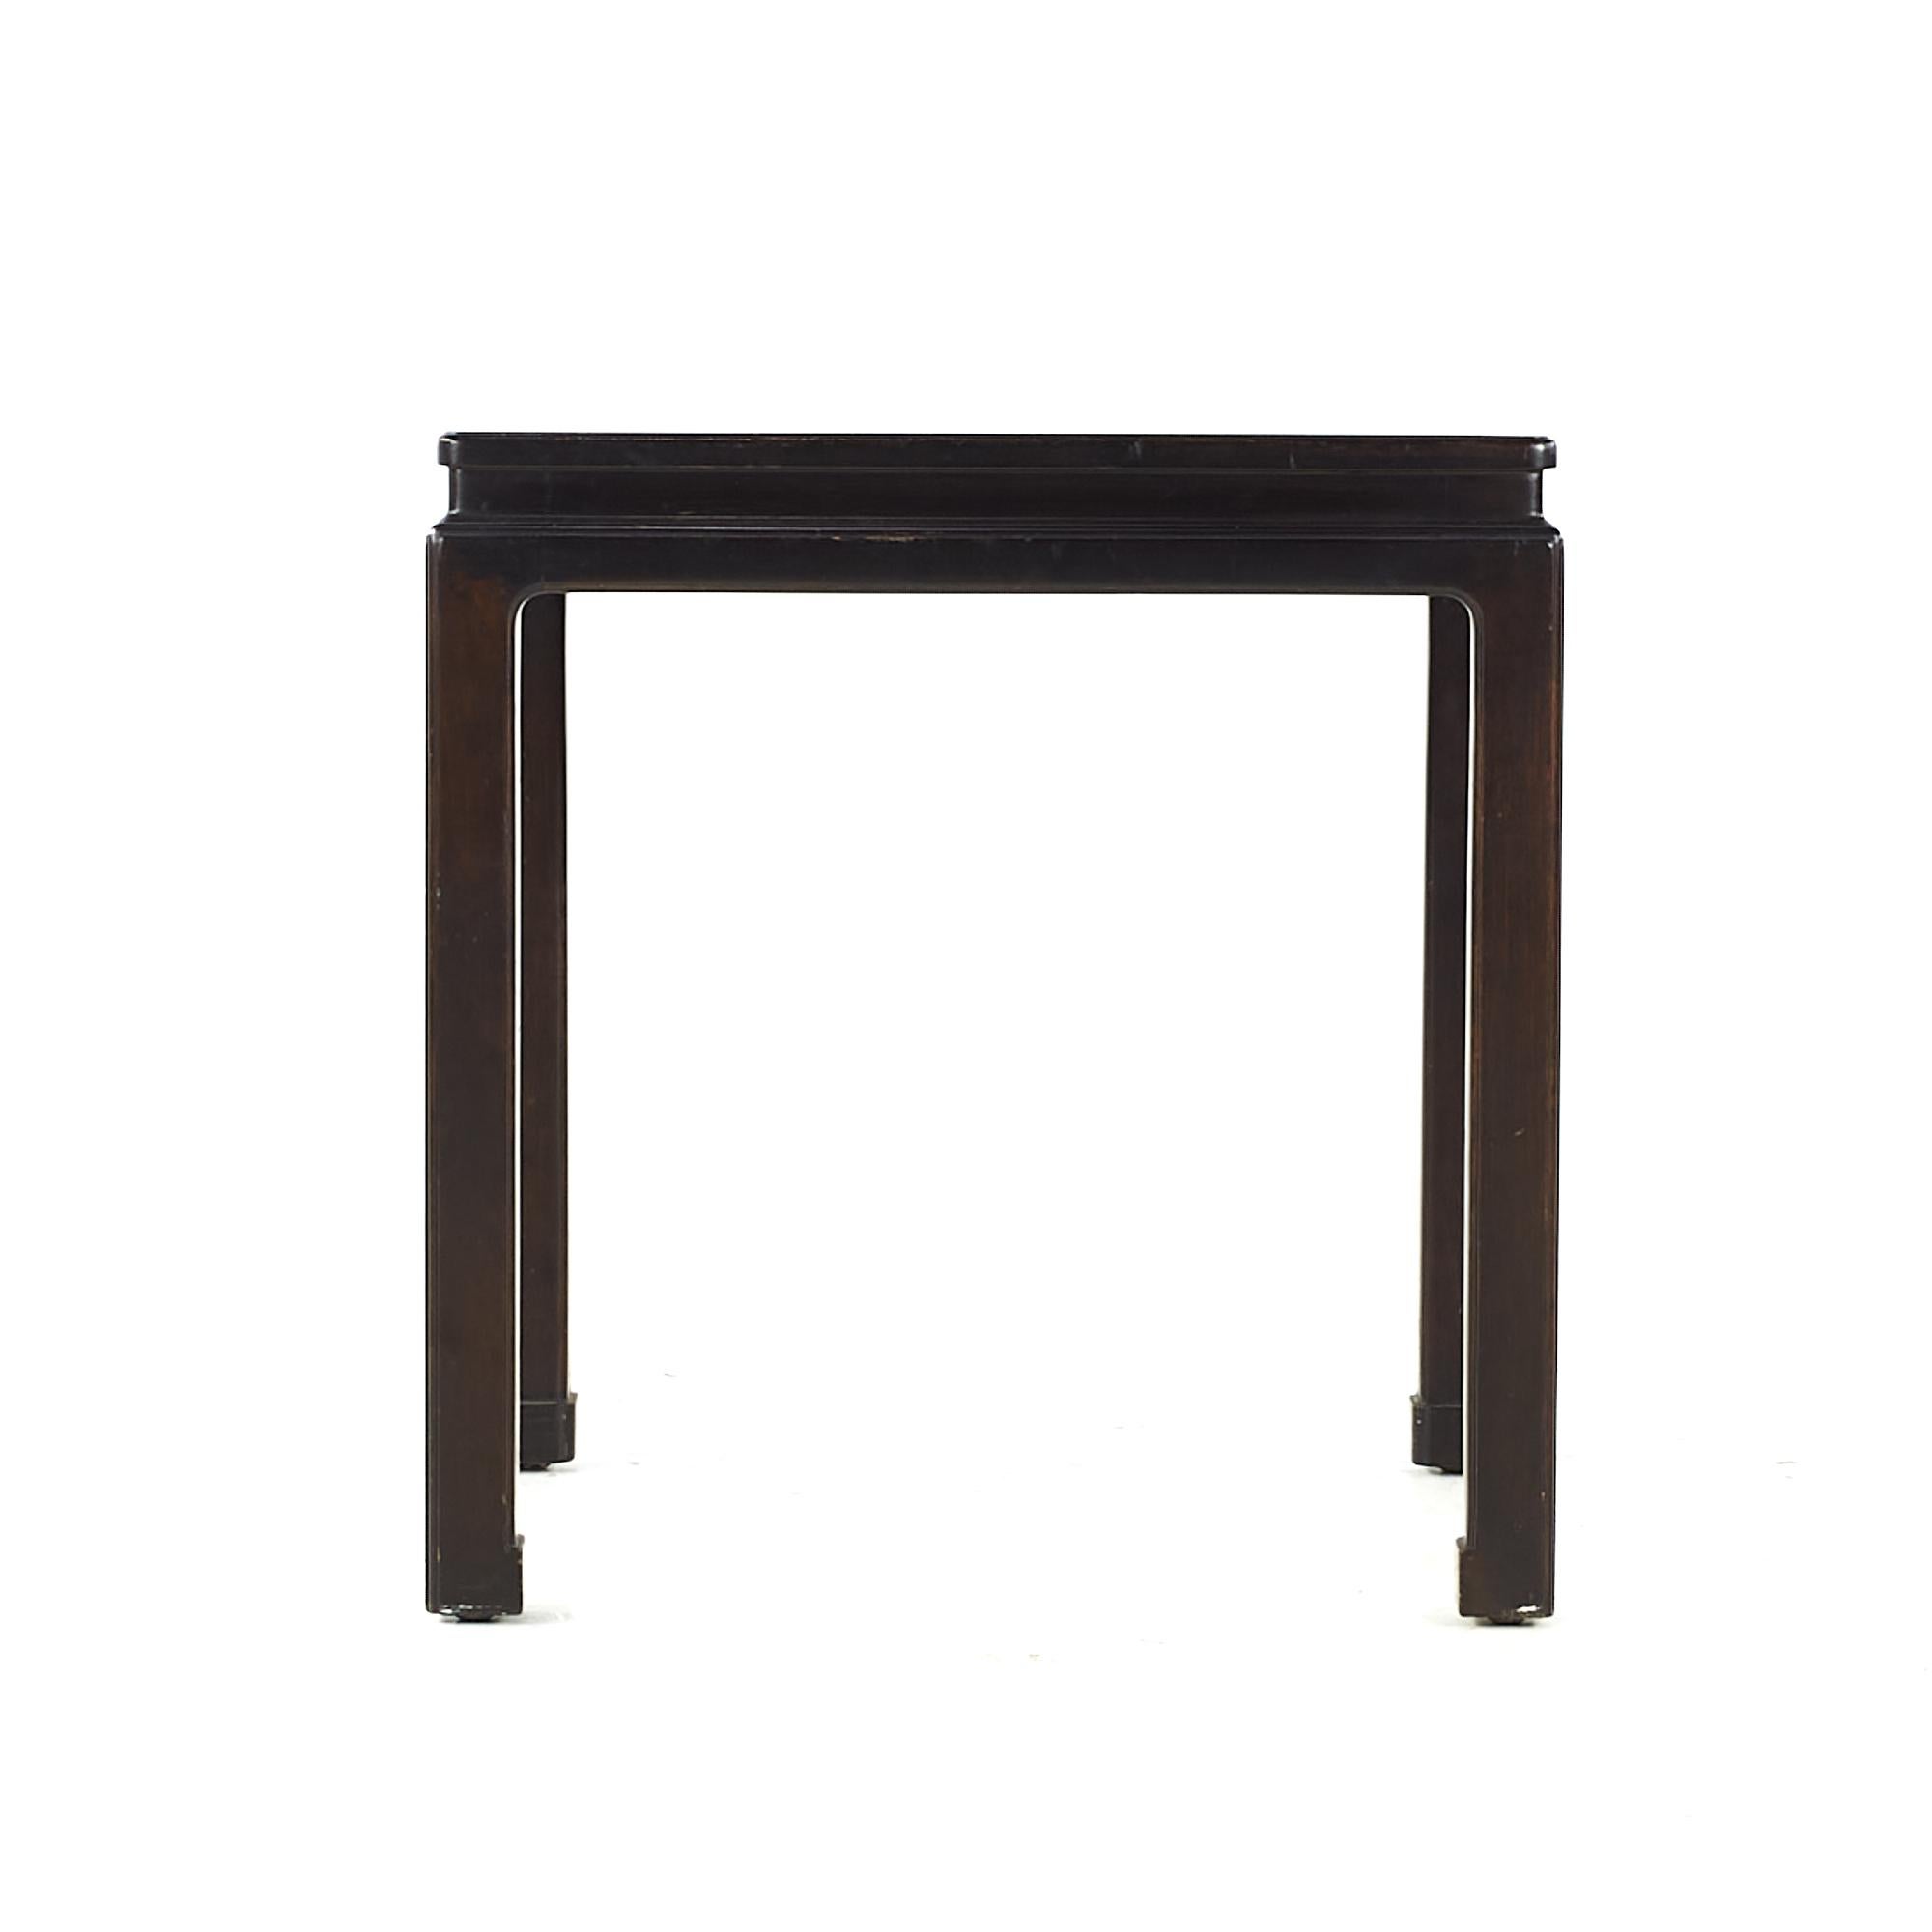 Edward Wormley for Dunbar midcentury Side End Table

This side table measures: 21 wide x 21 deep x 22.5 inches high

All pieces of furniture can be had in what we call restored vintage condition. That means the piece is restored upon purchase so